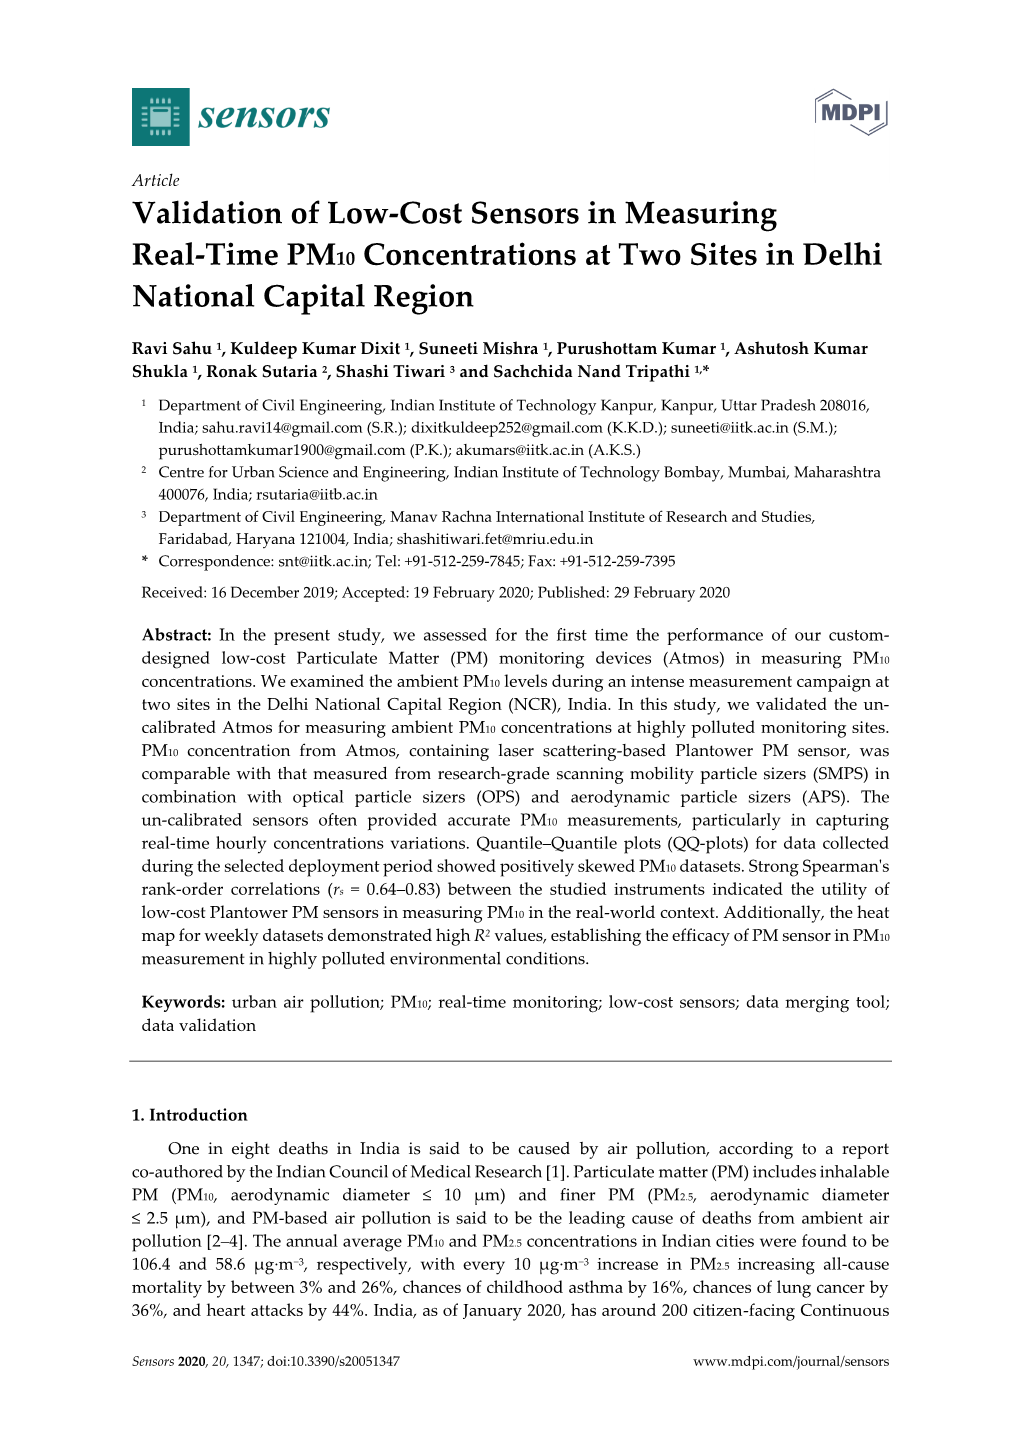 Validation of Low-Cost Sensors in Measuring Real-Time PM10 Concentrations at Two Sites in Delhi National Capital Region